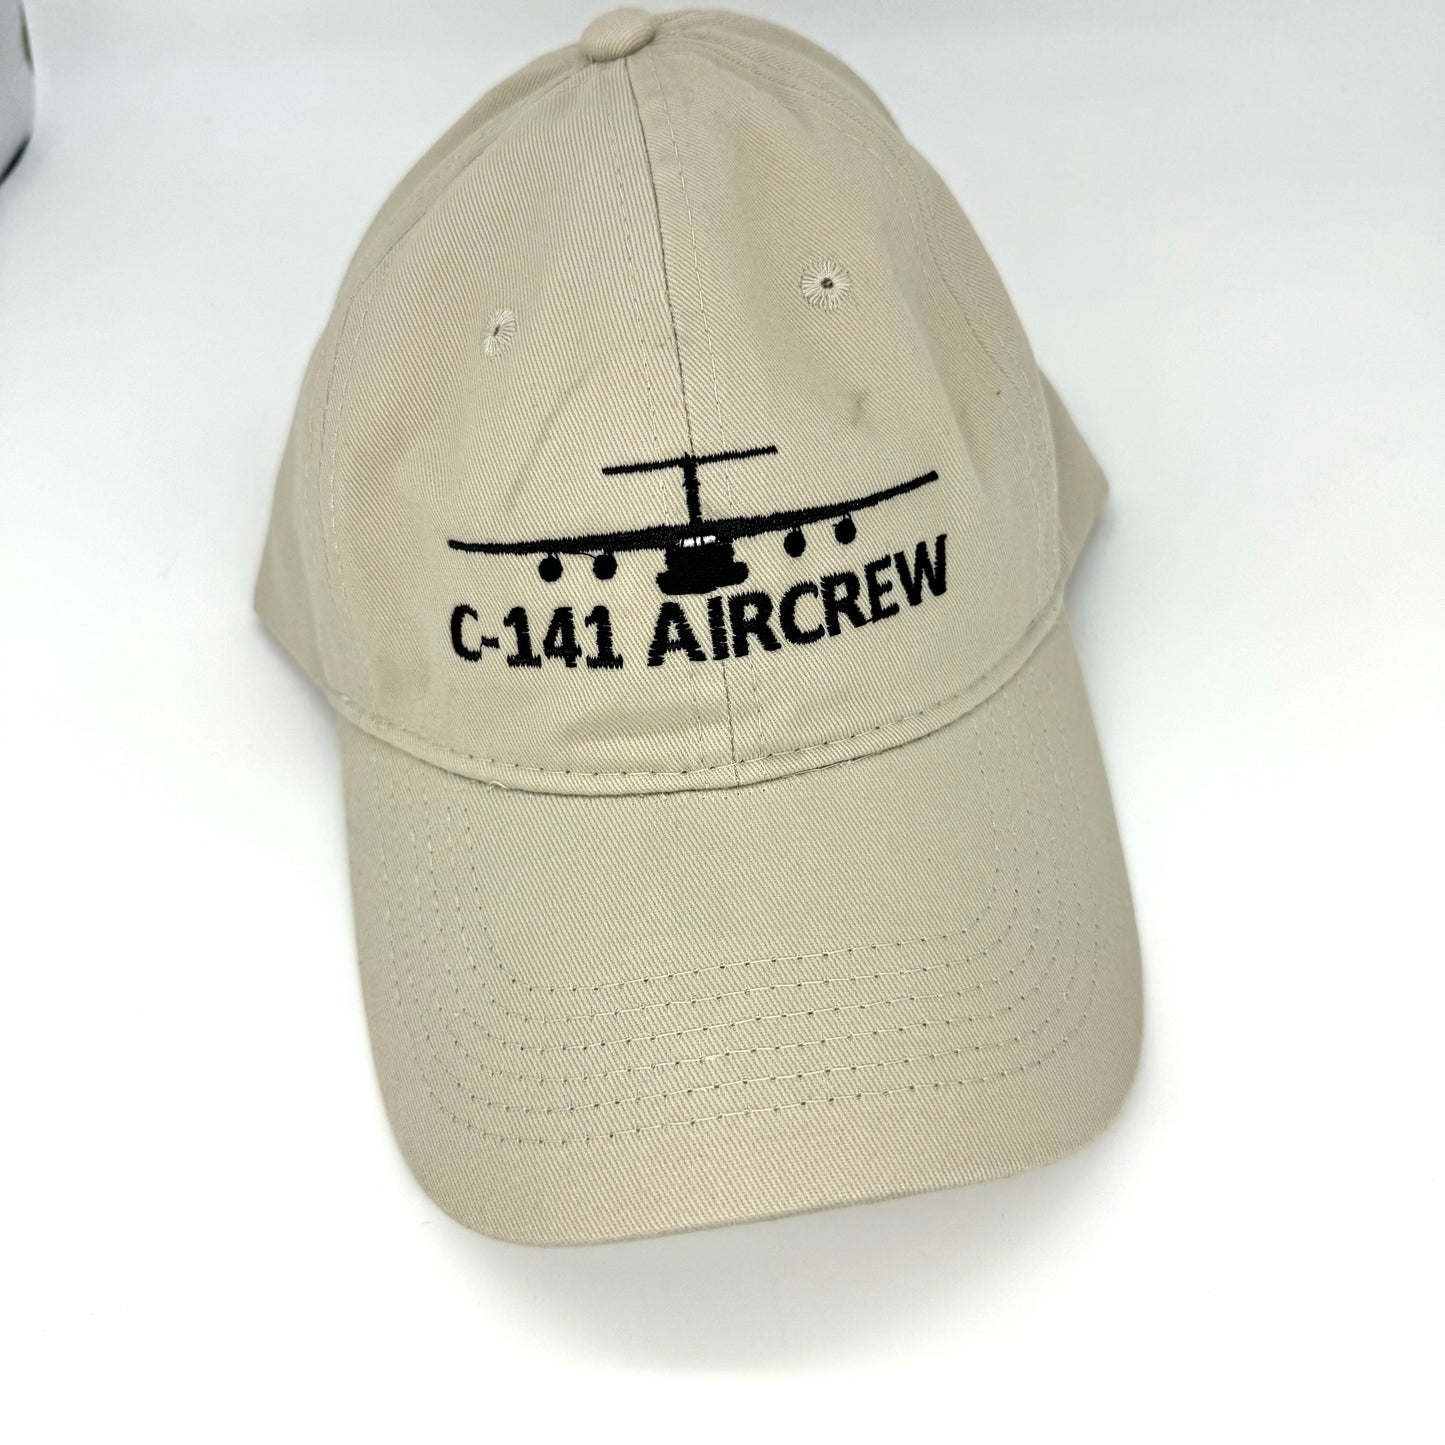 C-141 Starlifter Aircrew Cap - Hat Embroidered Unstructured Twill